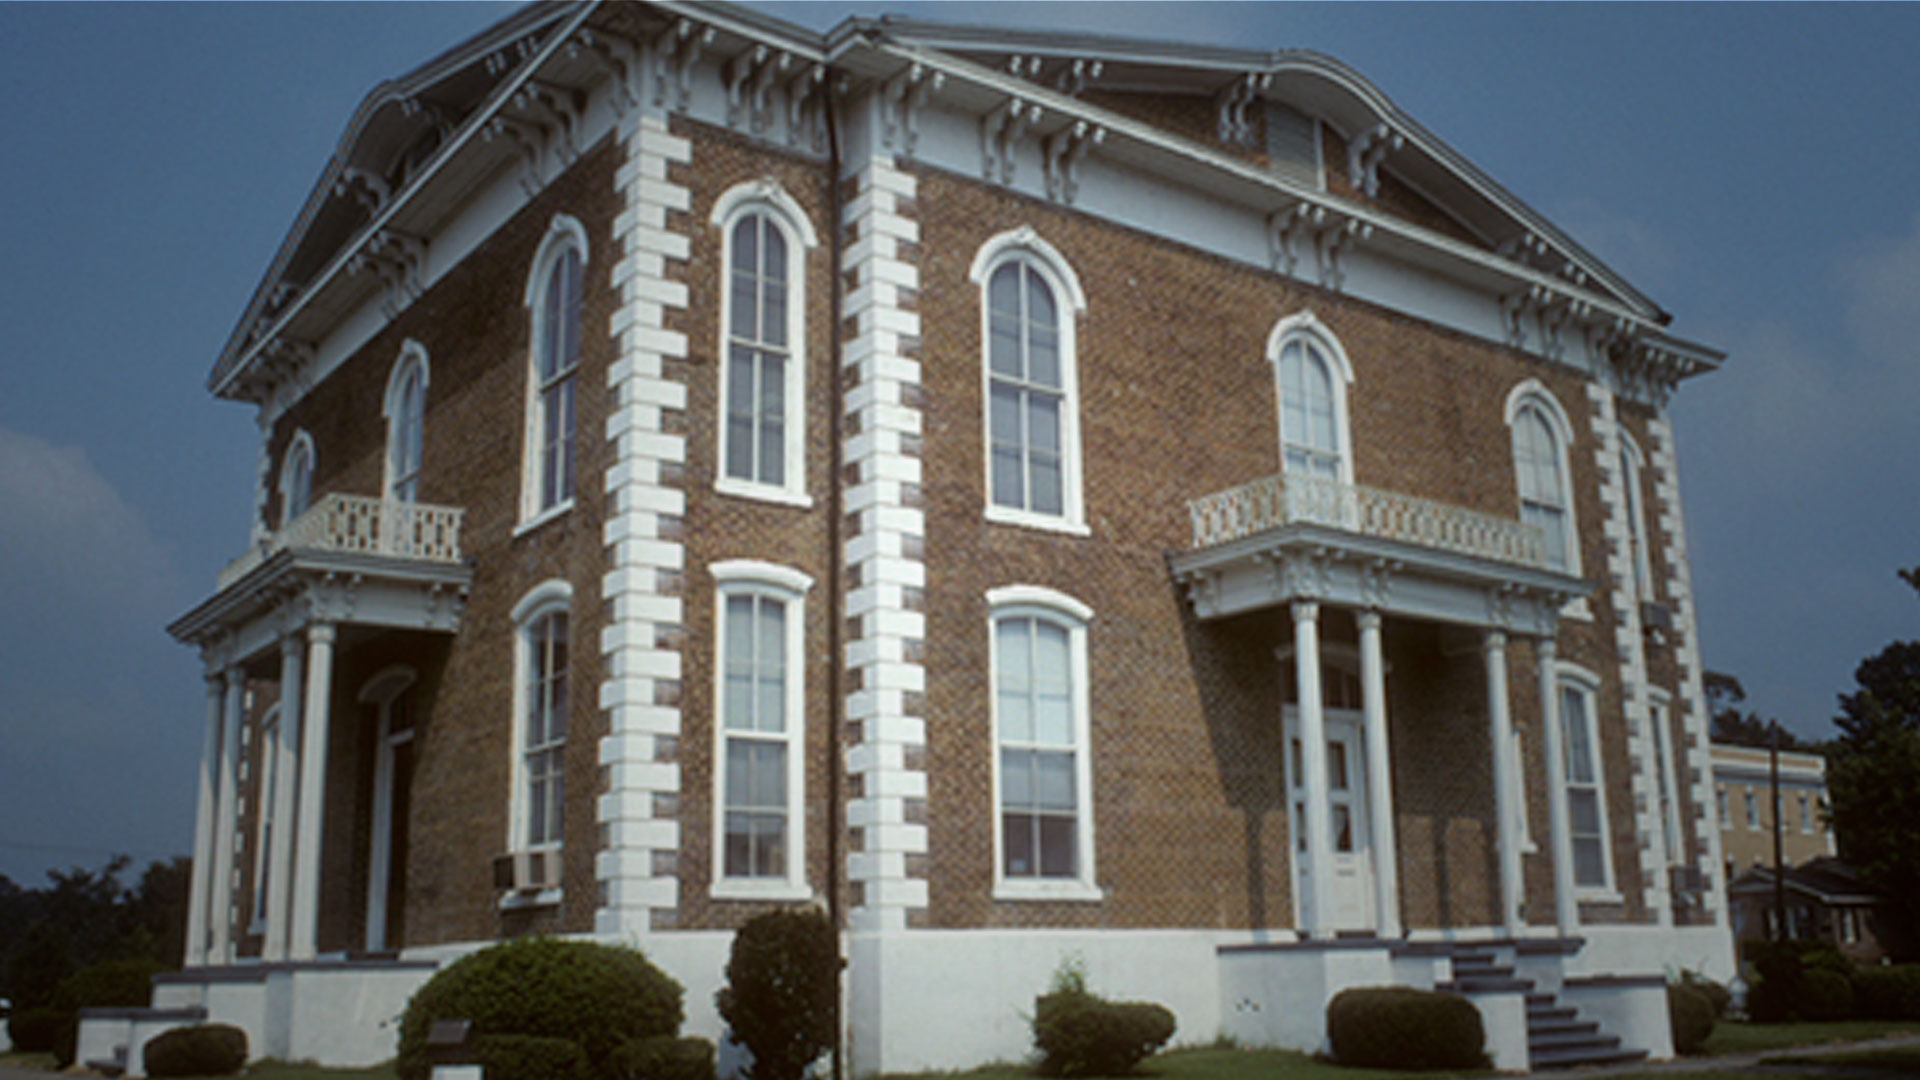 Pickens County Courthouse